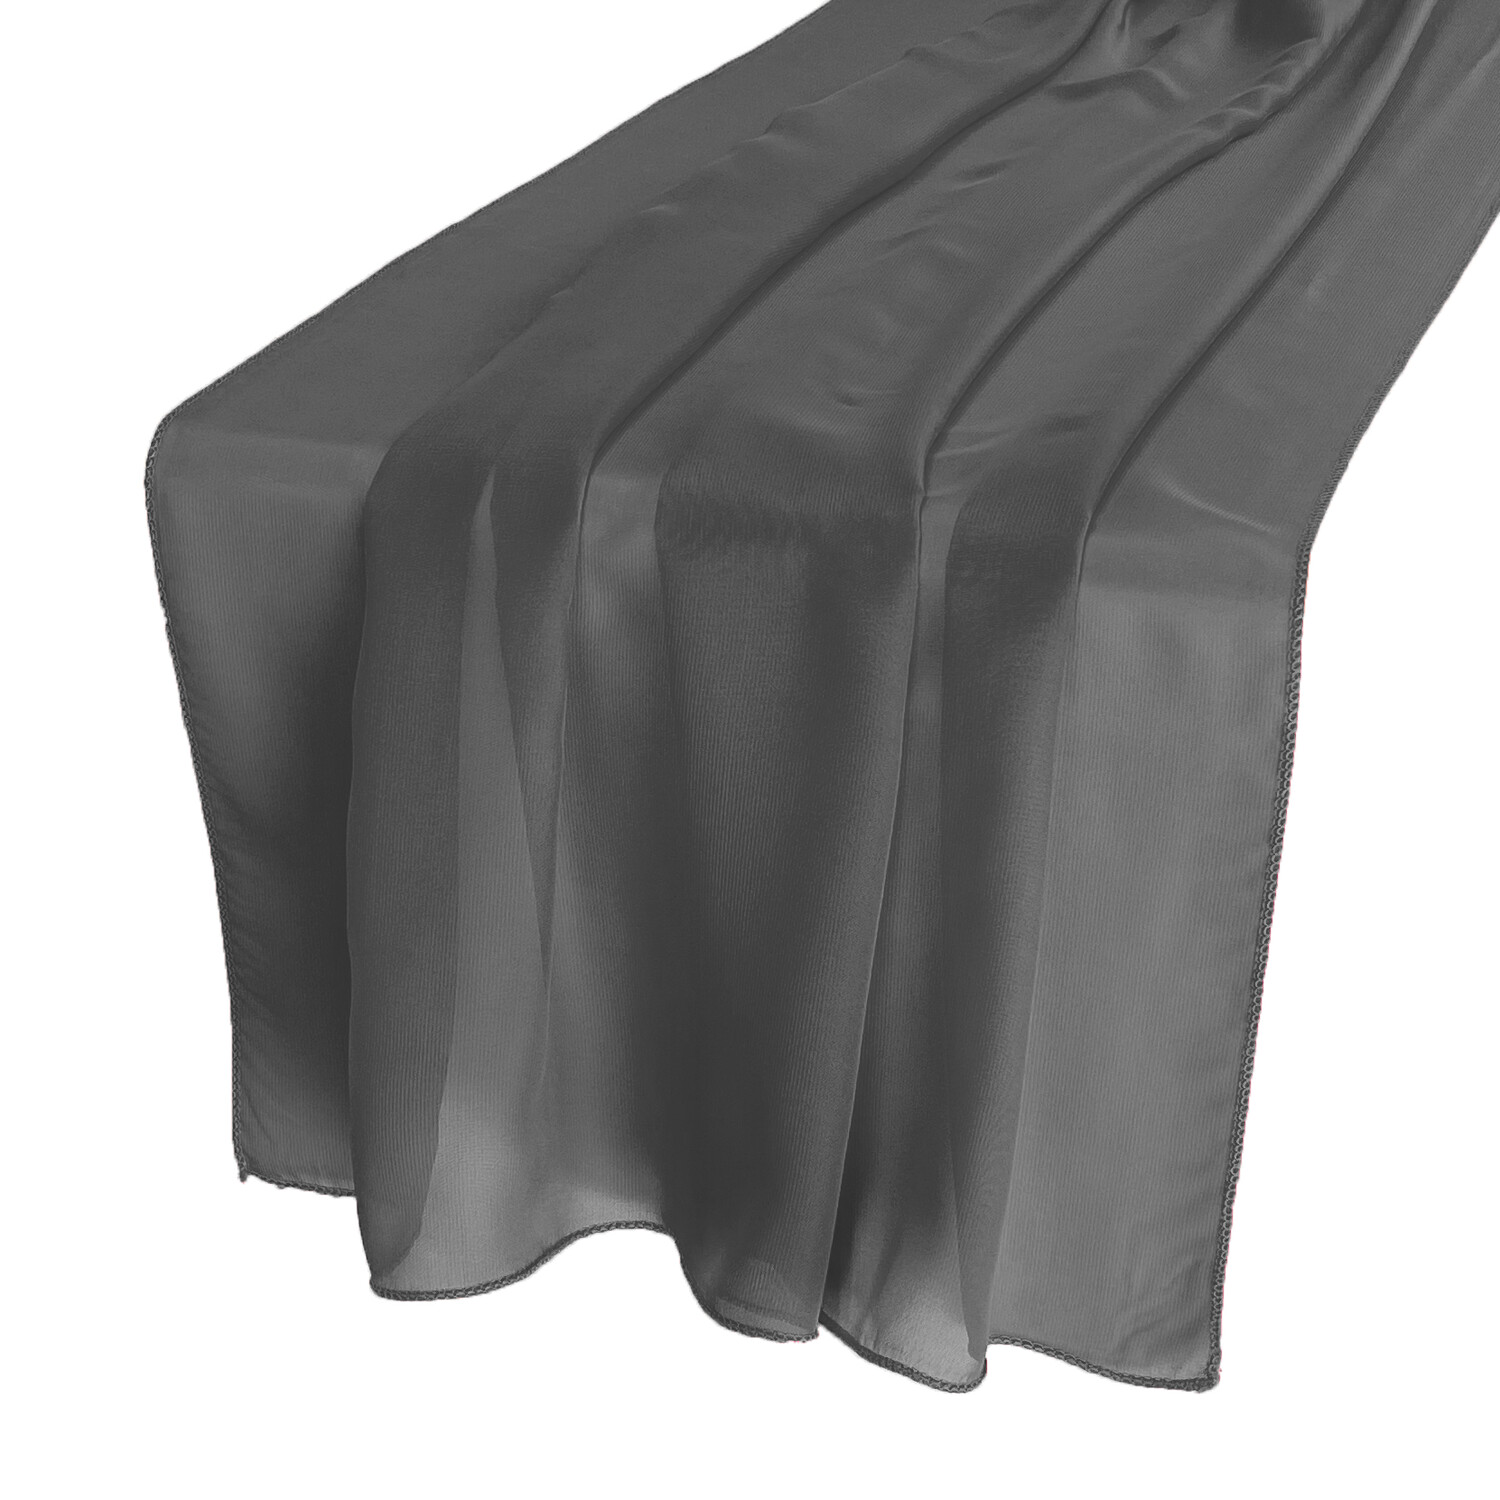 Pewter Chiffon Table Runners